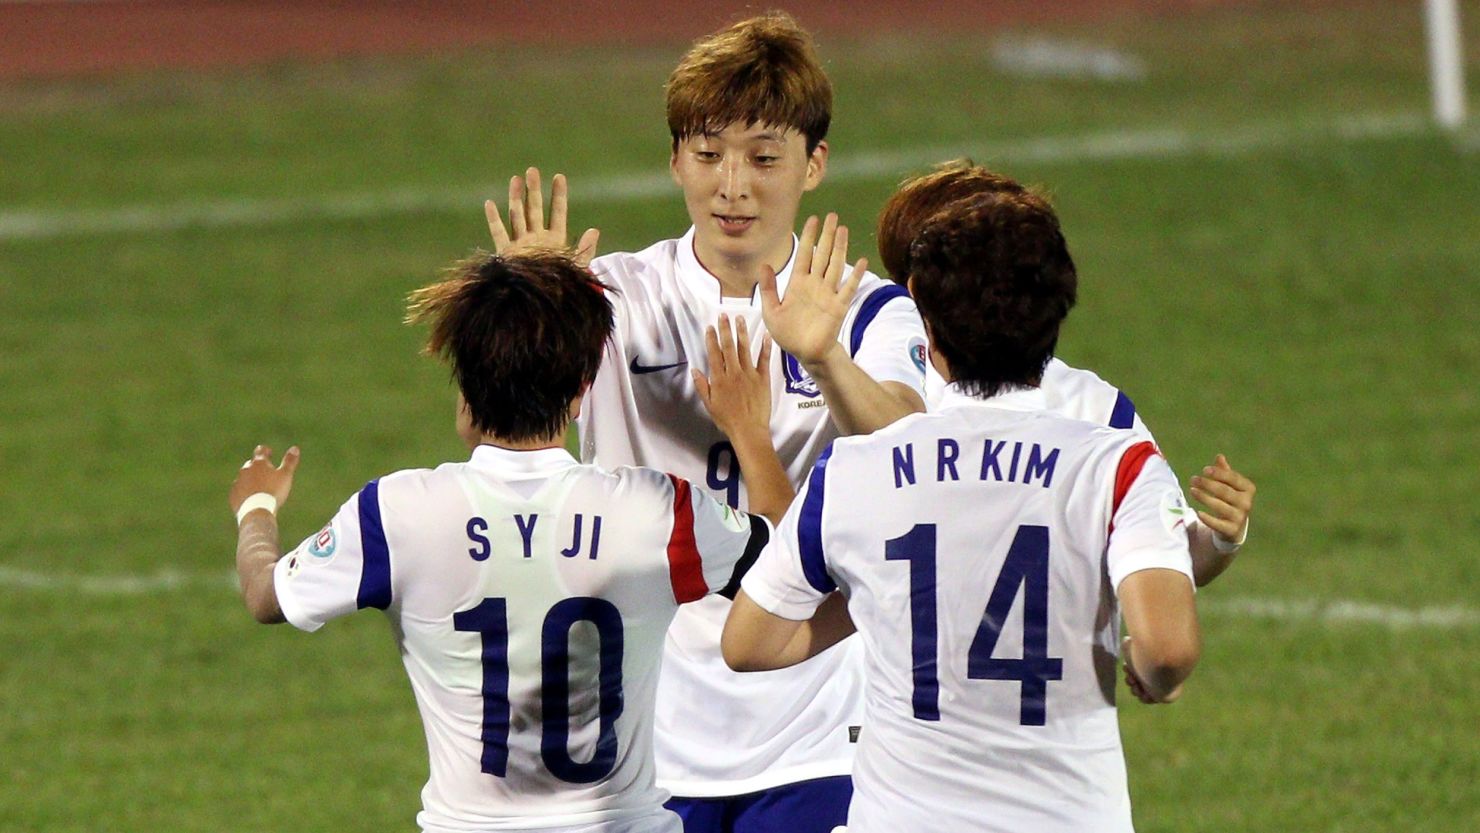 HO CHI MINH CITY, VIETNAM - MAY 17:  Park Eun Sun #9 of Korea Republic celebrates with team-mates after scoring against Thailand during the AFC Women's Asian Cup Gropu B match between Thailand and Korea Republic at Thong Nhat Stadium on May 17, 2014 in Ho Chi Minh City, Vietnam.